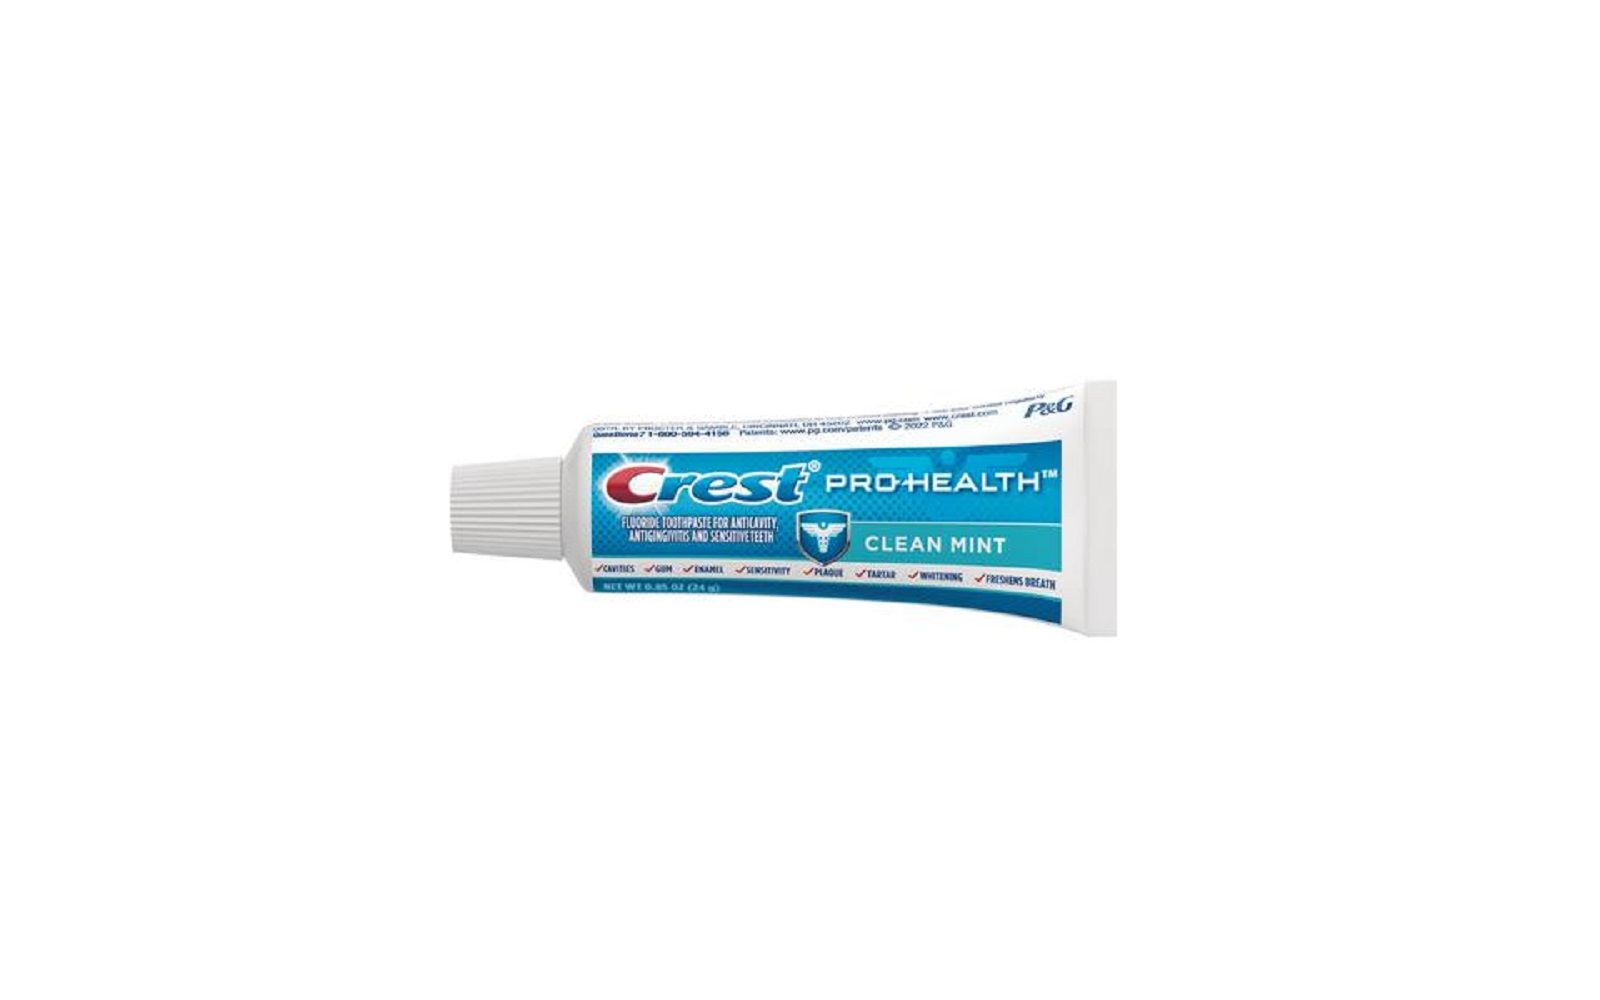 Crest® prohealth™ toothpaste, clean mint - procter & gamble company